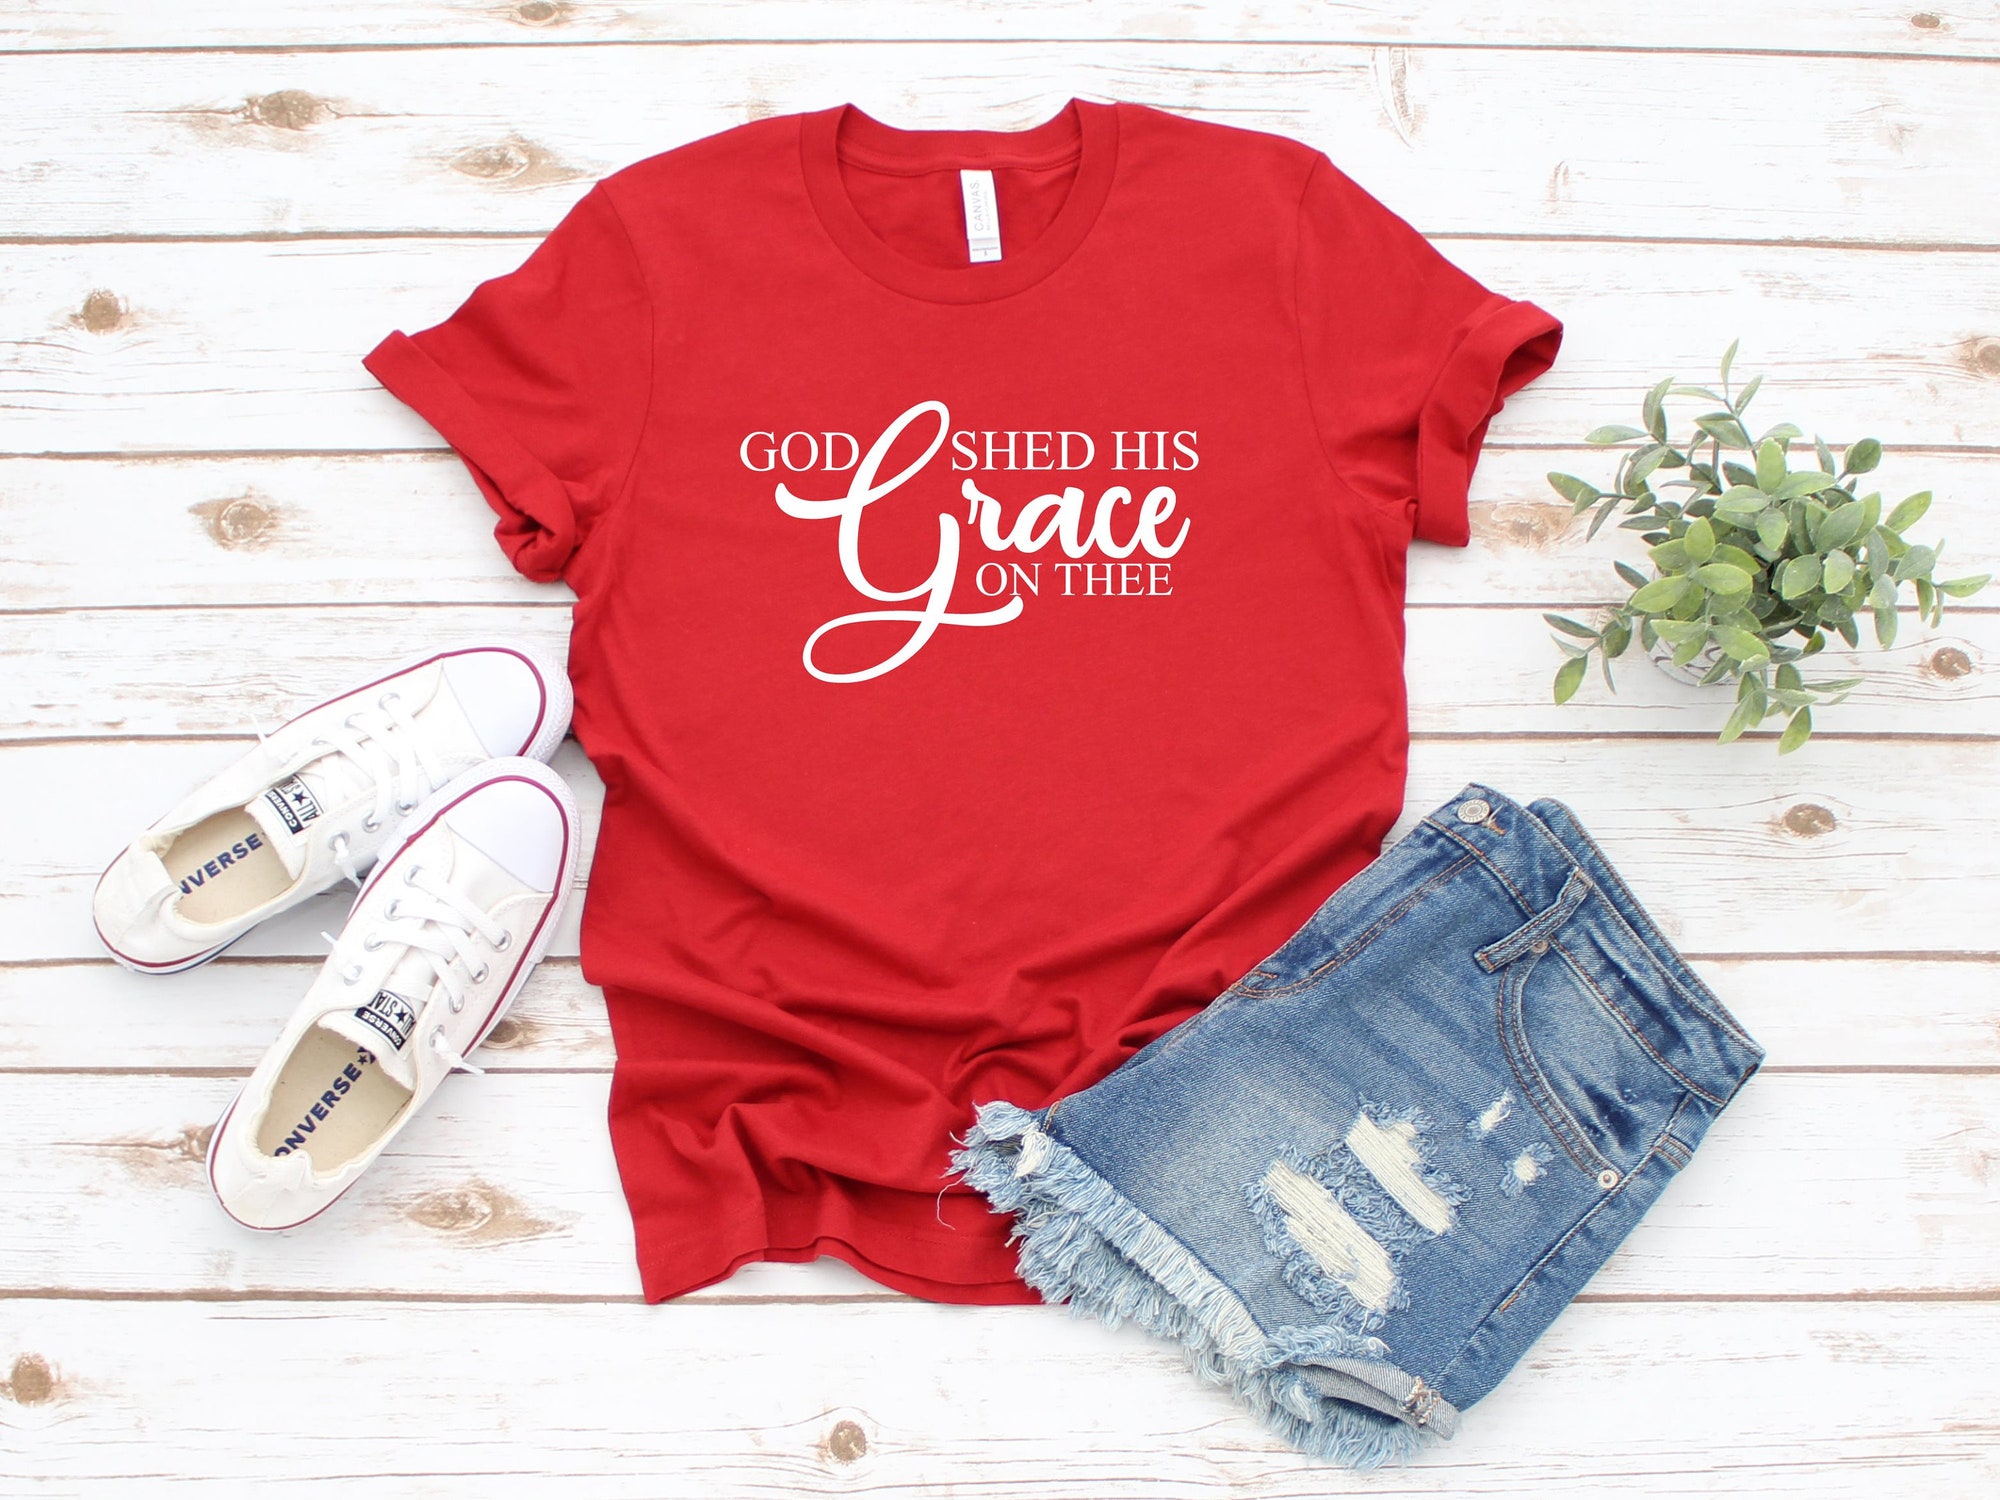 Discover God Shed His Grace on Thee 4th of July Shirt, Womens Tee, Merica, Stars and Stripes TShirt, 4th of July Graphic Tee